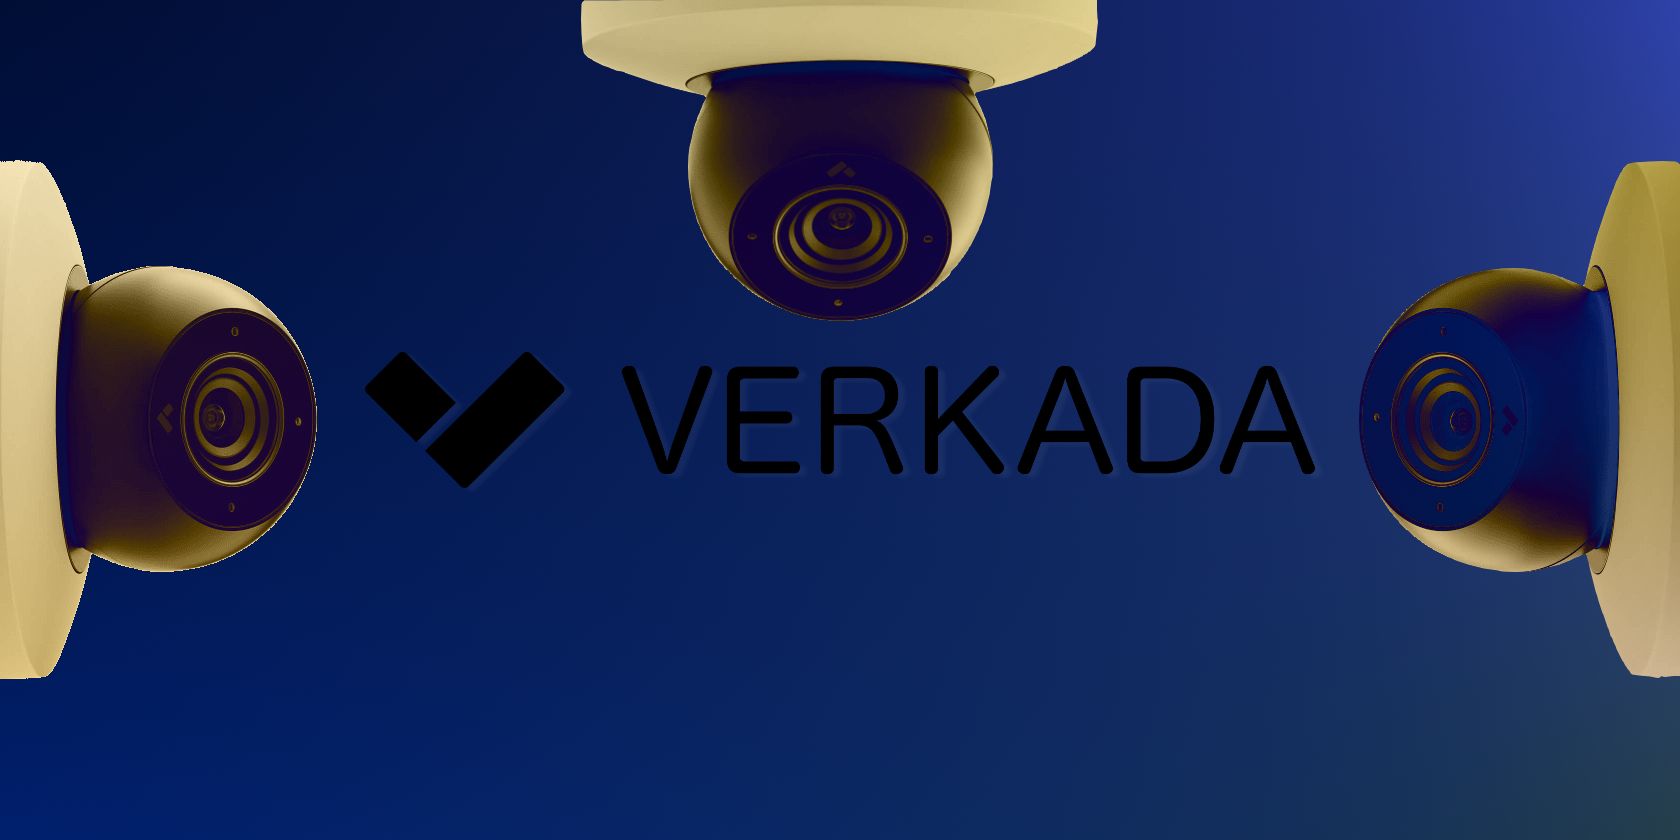 Centering Cybersecurity and Privacy at Verkada